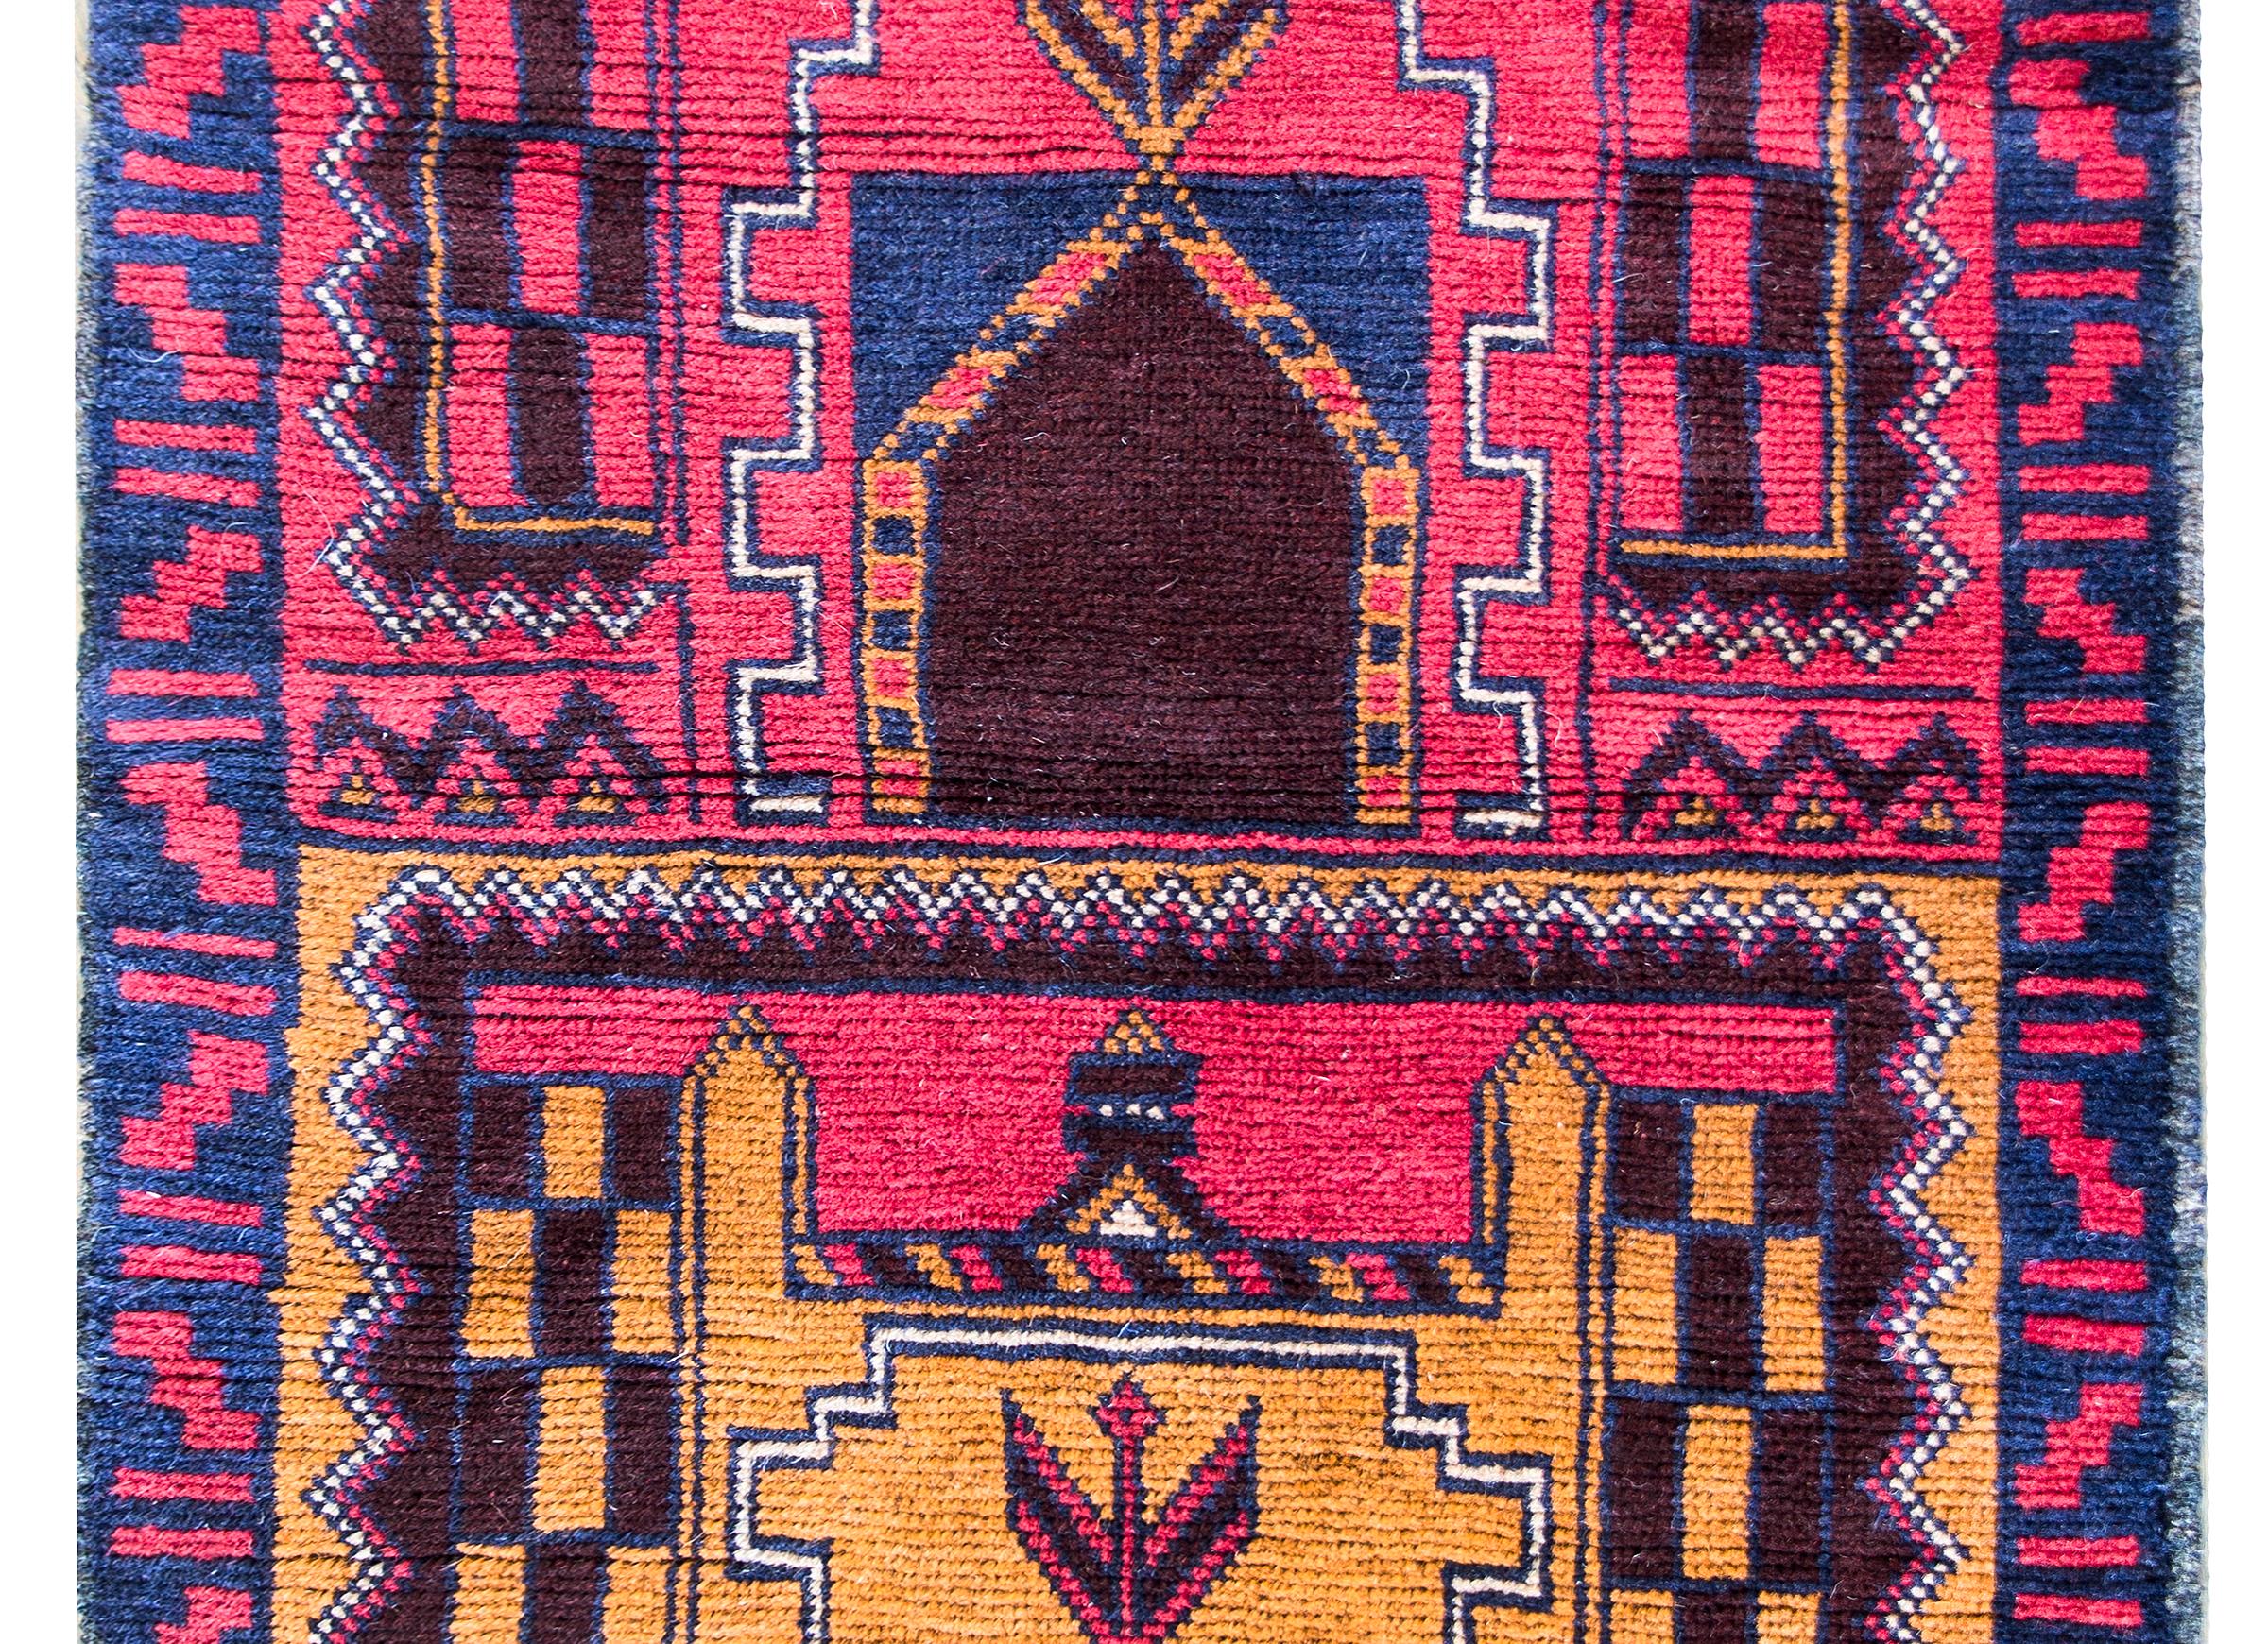 A beautiful early 20th century Turkish Konya Prayer rug with two architectural-style images woven in bright crimsons, golds, violets, and indigos, and surrounded by a beautiful geometric pattered border.